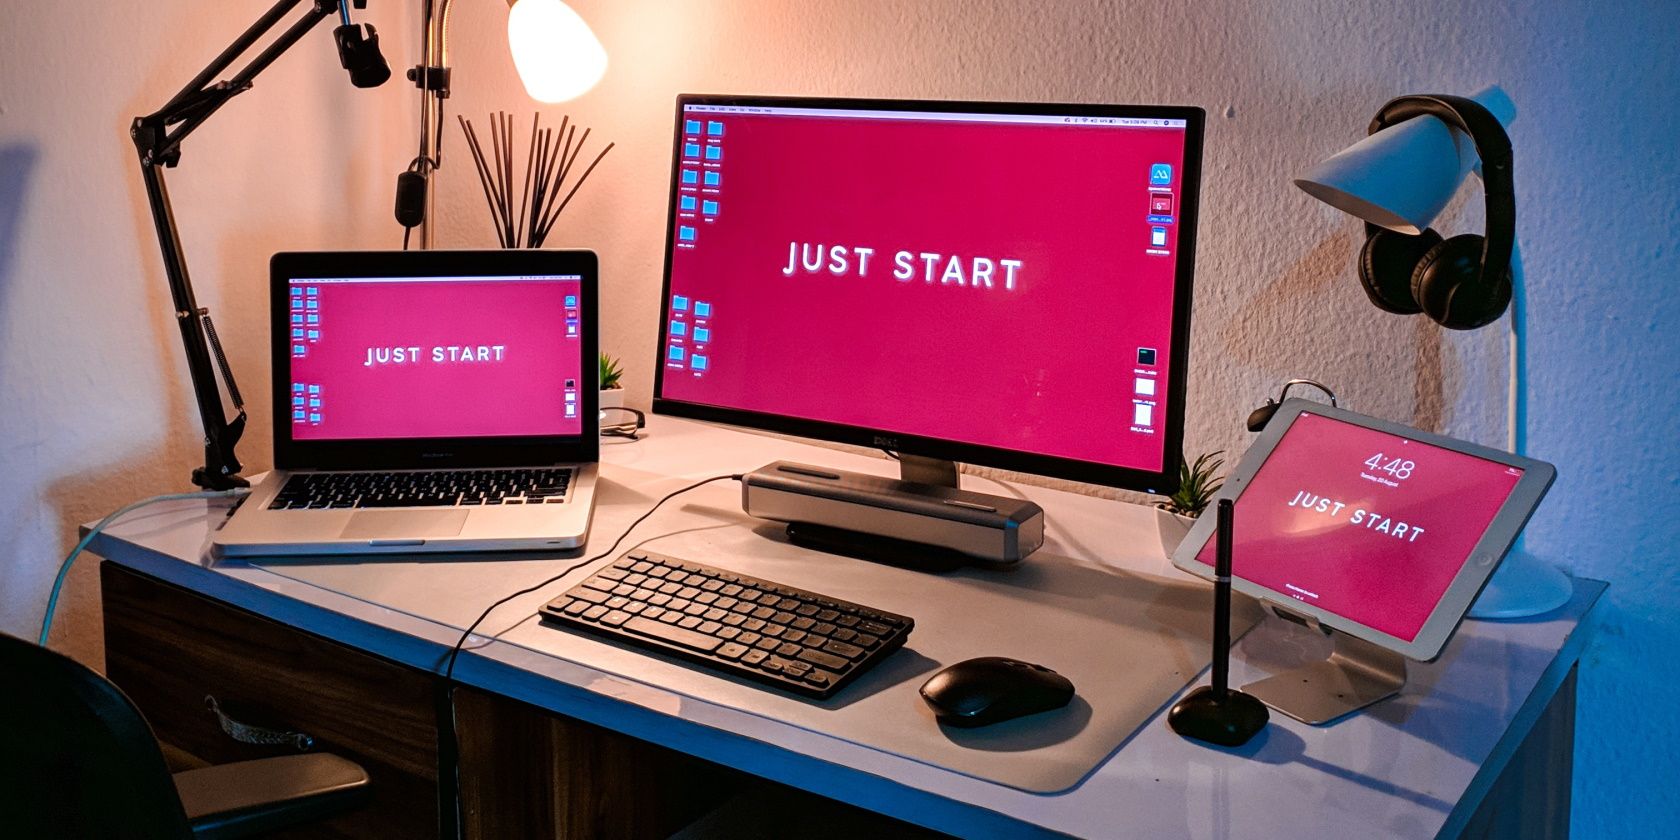 How to Start X11 on Linux Without a Display Manager